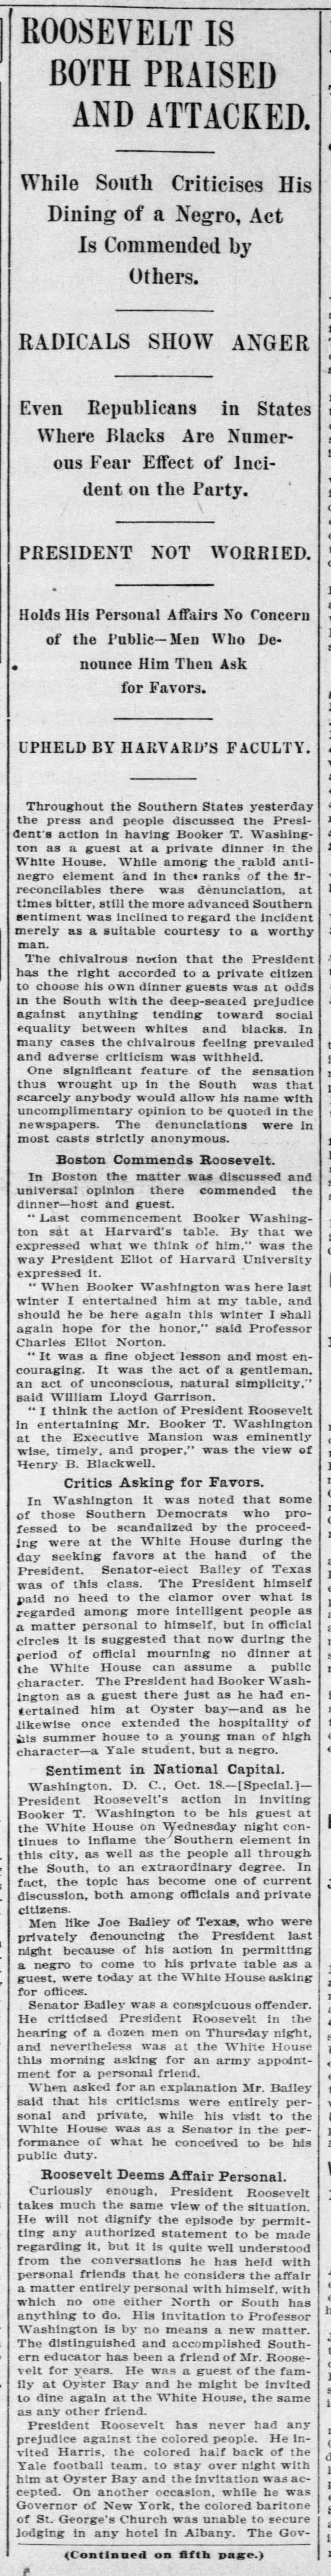 Summary of different reactions to Booker T. Washington's 1901 dinner with Pres. Theodore Roosevelt